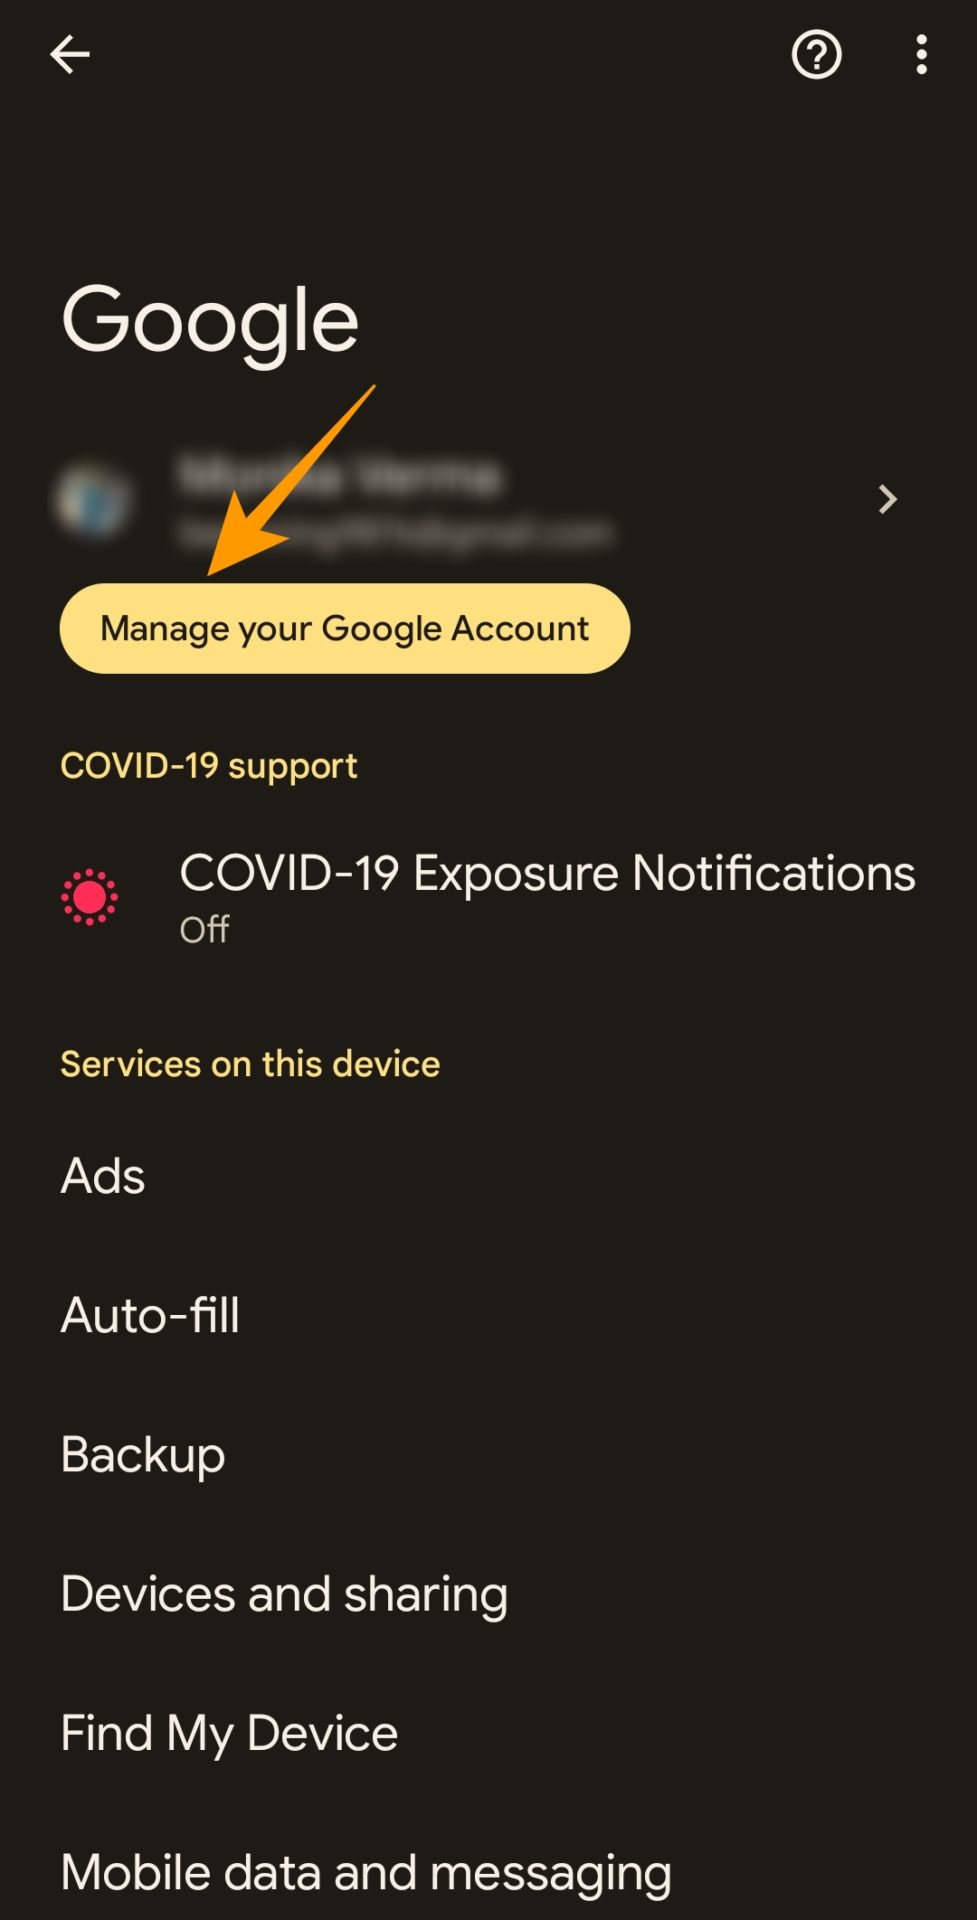 Manage your Google account option in Gmail